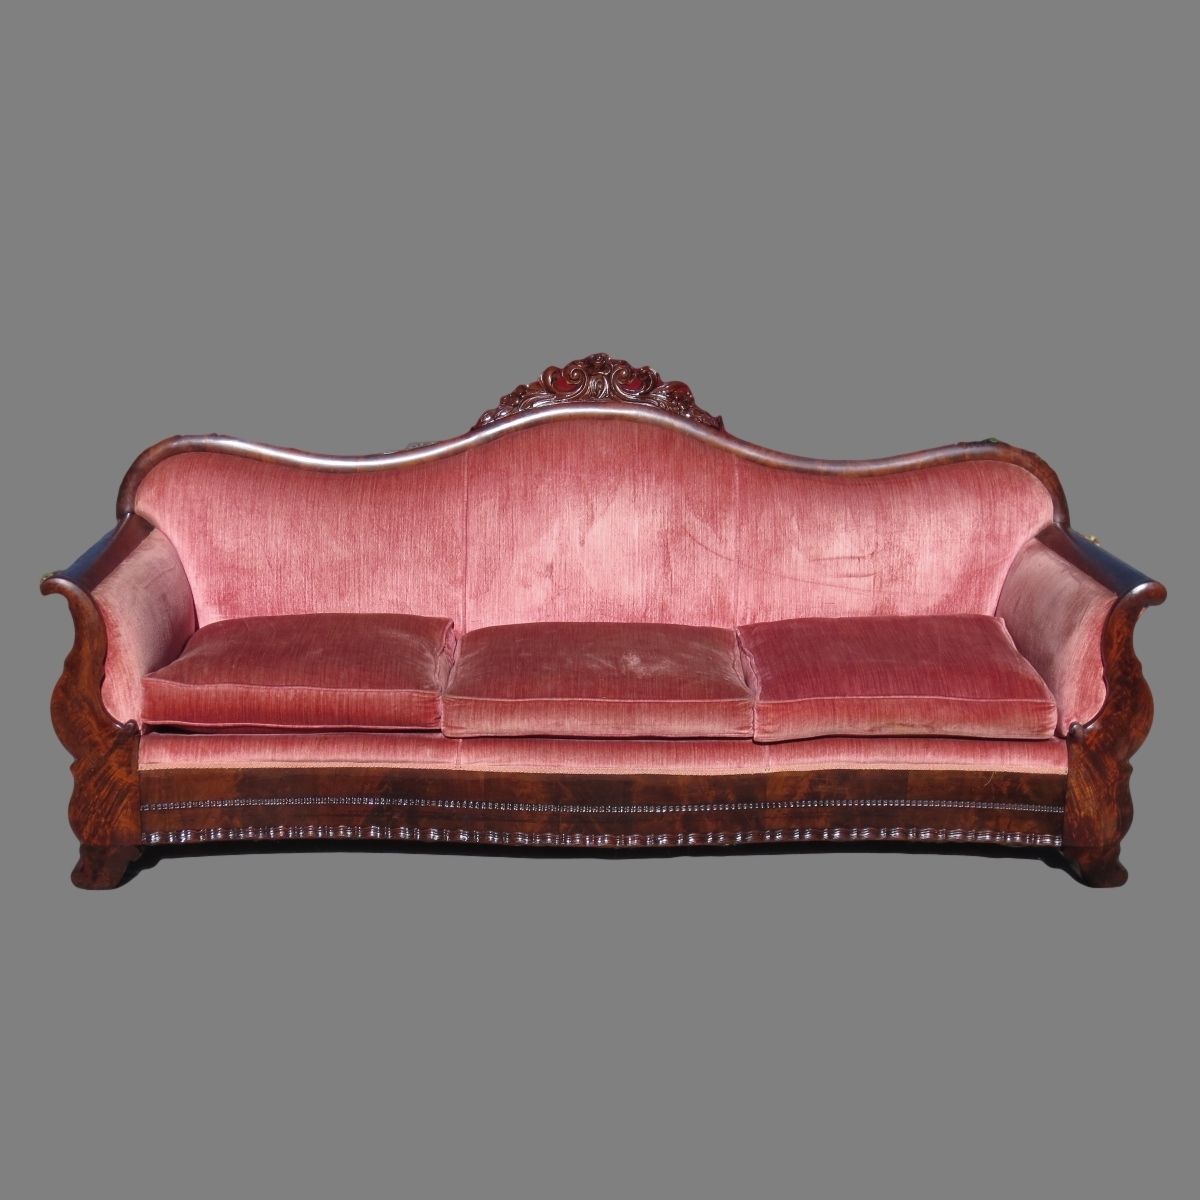 Fancy Antique Couch 50 For Your Sofa Room Ideas With Antique Couch With Regard To Antique Sofas (View 10 of 10)